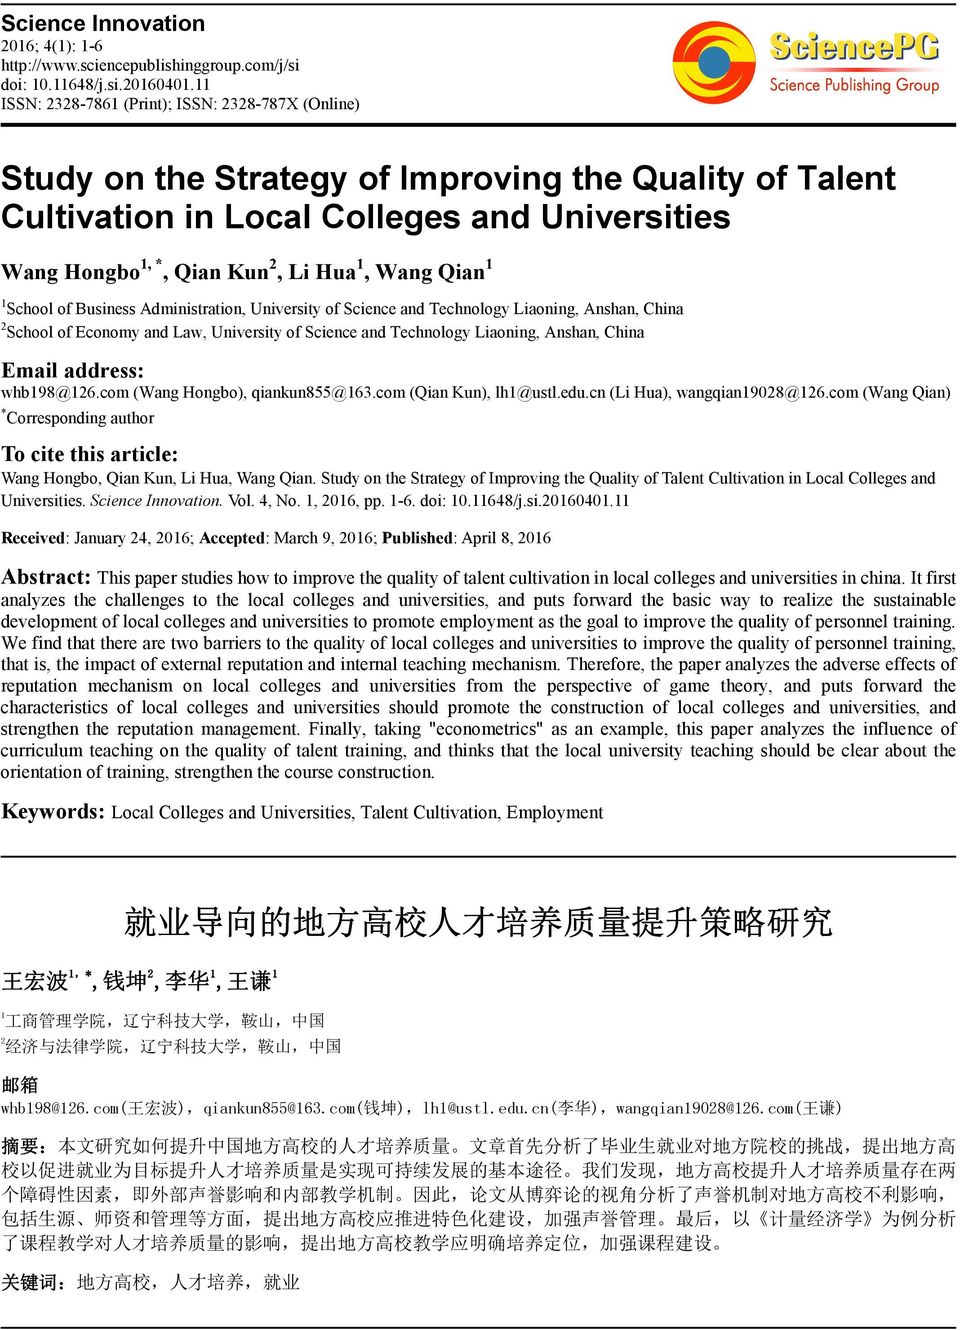 Wang Qian 1 1 School of Business Administration, University of Science and Technology Liaoning, Anshan, China 2 School of Economy and Law, University of Science and Technology Liaoning, Anshan, China